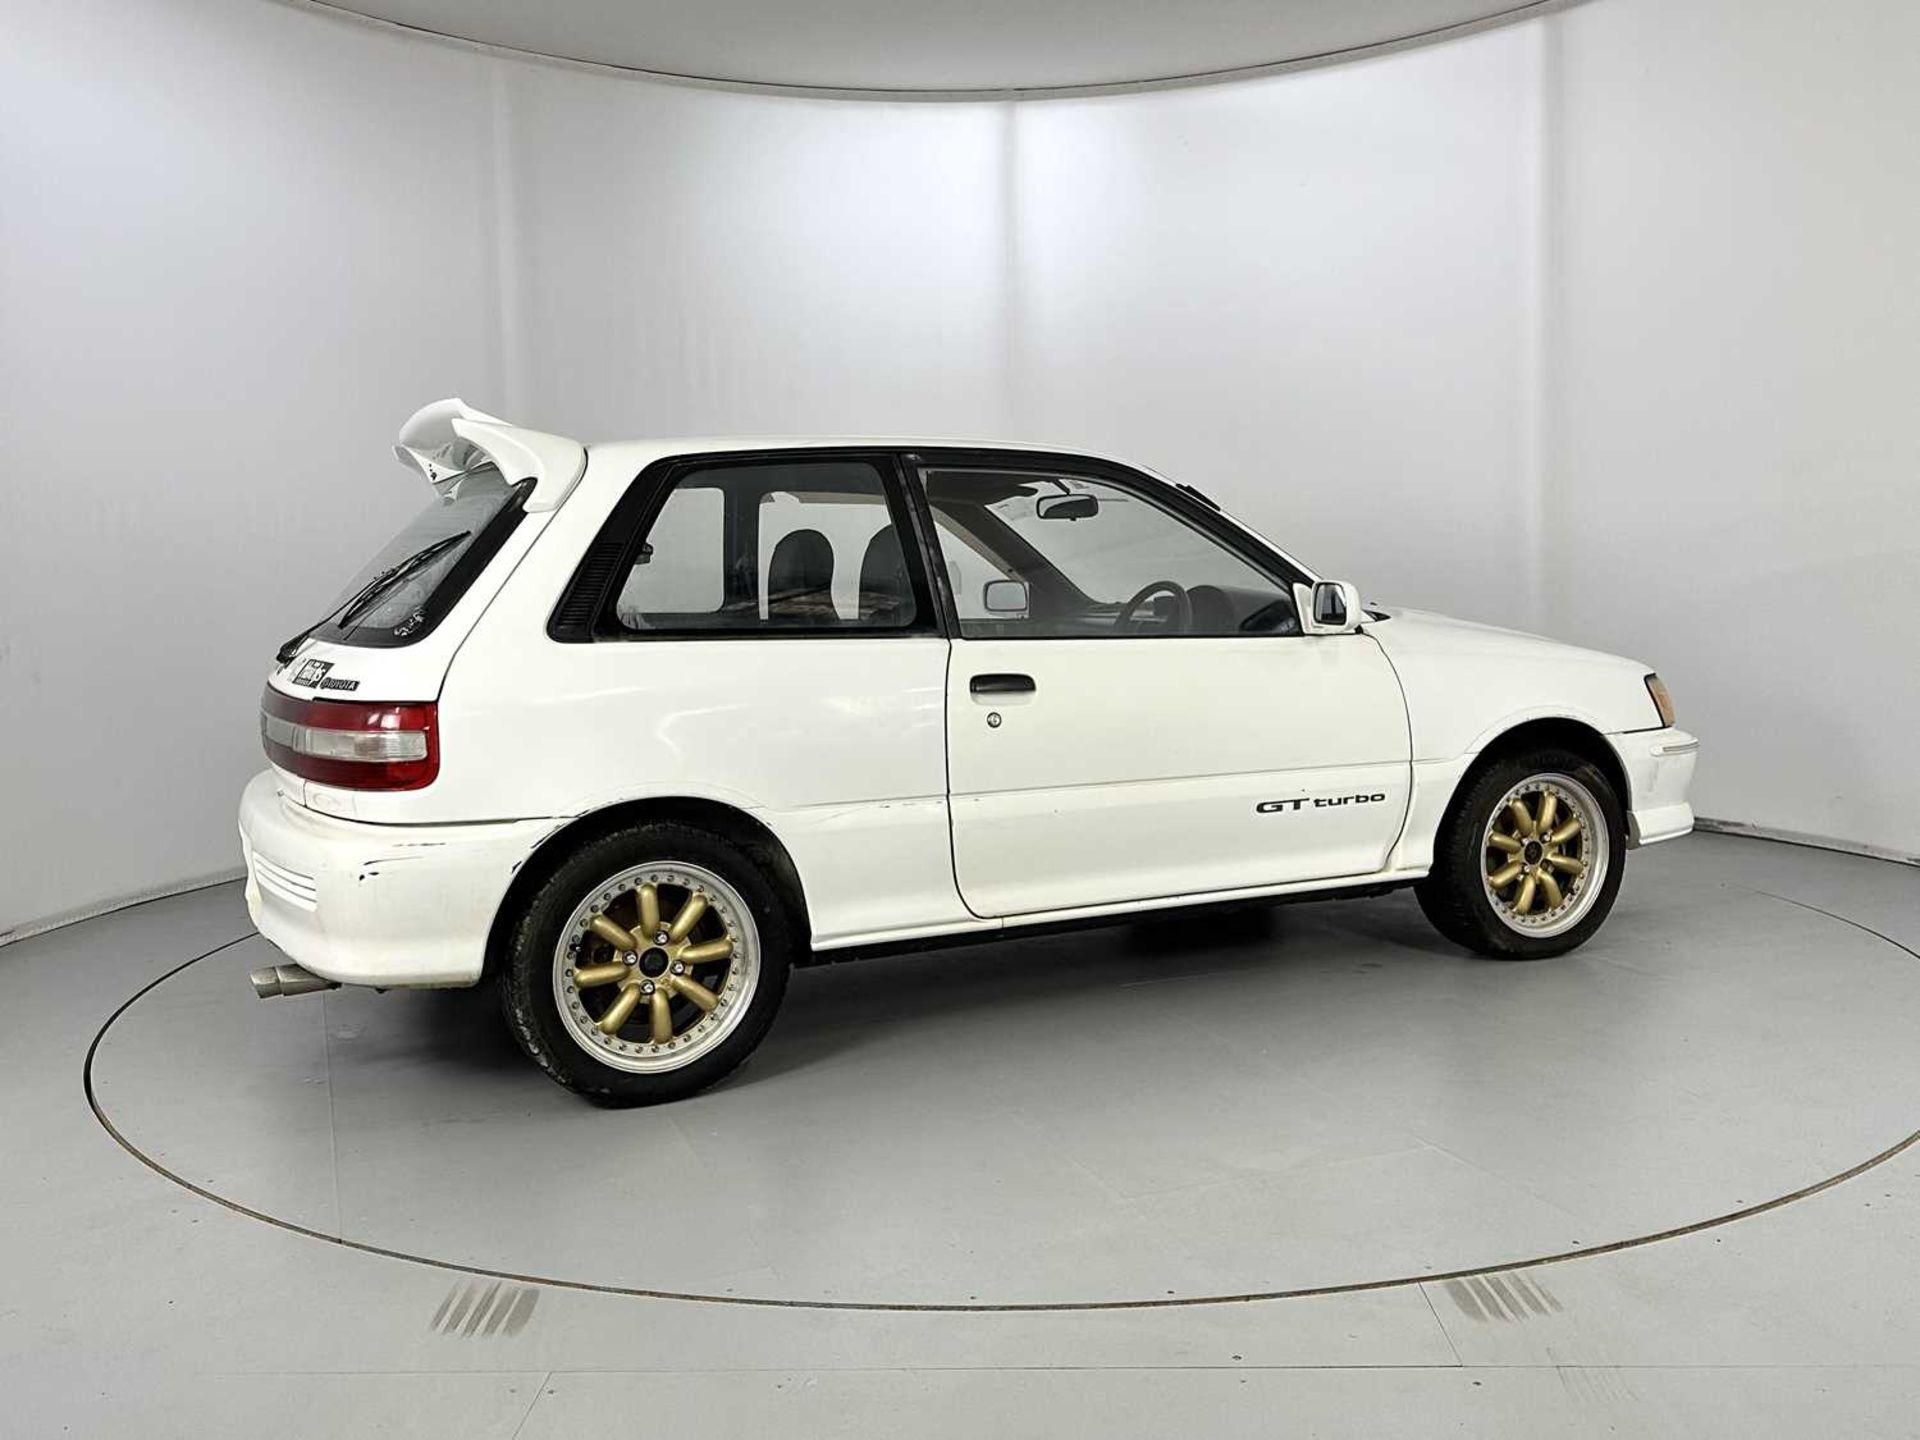 1990 Toyota Starlet GT Turbo - Image 10 of 29